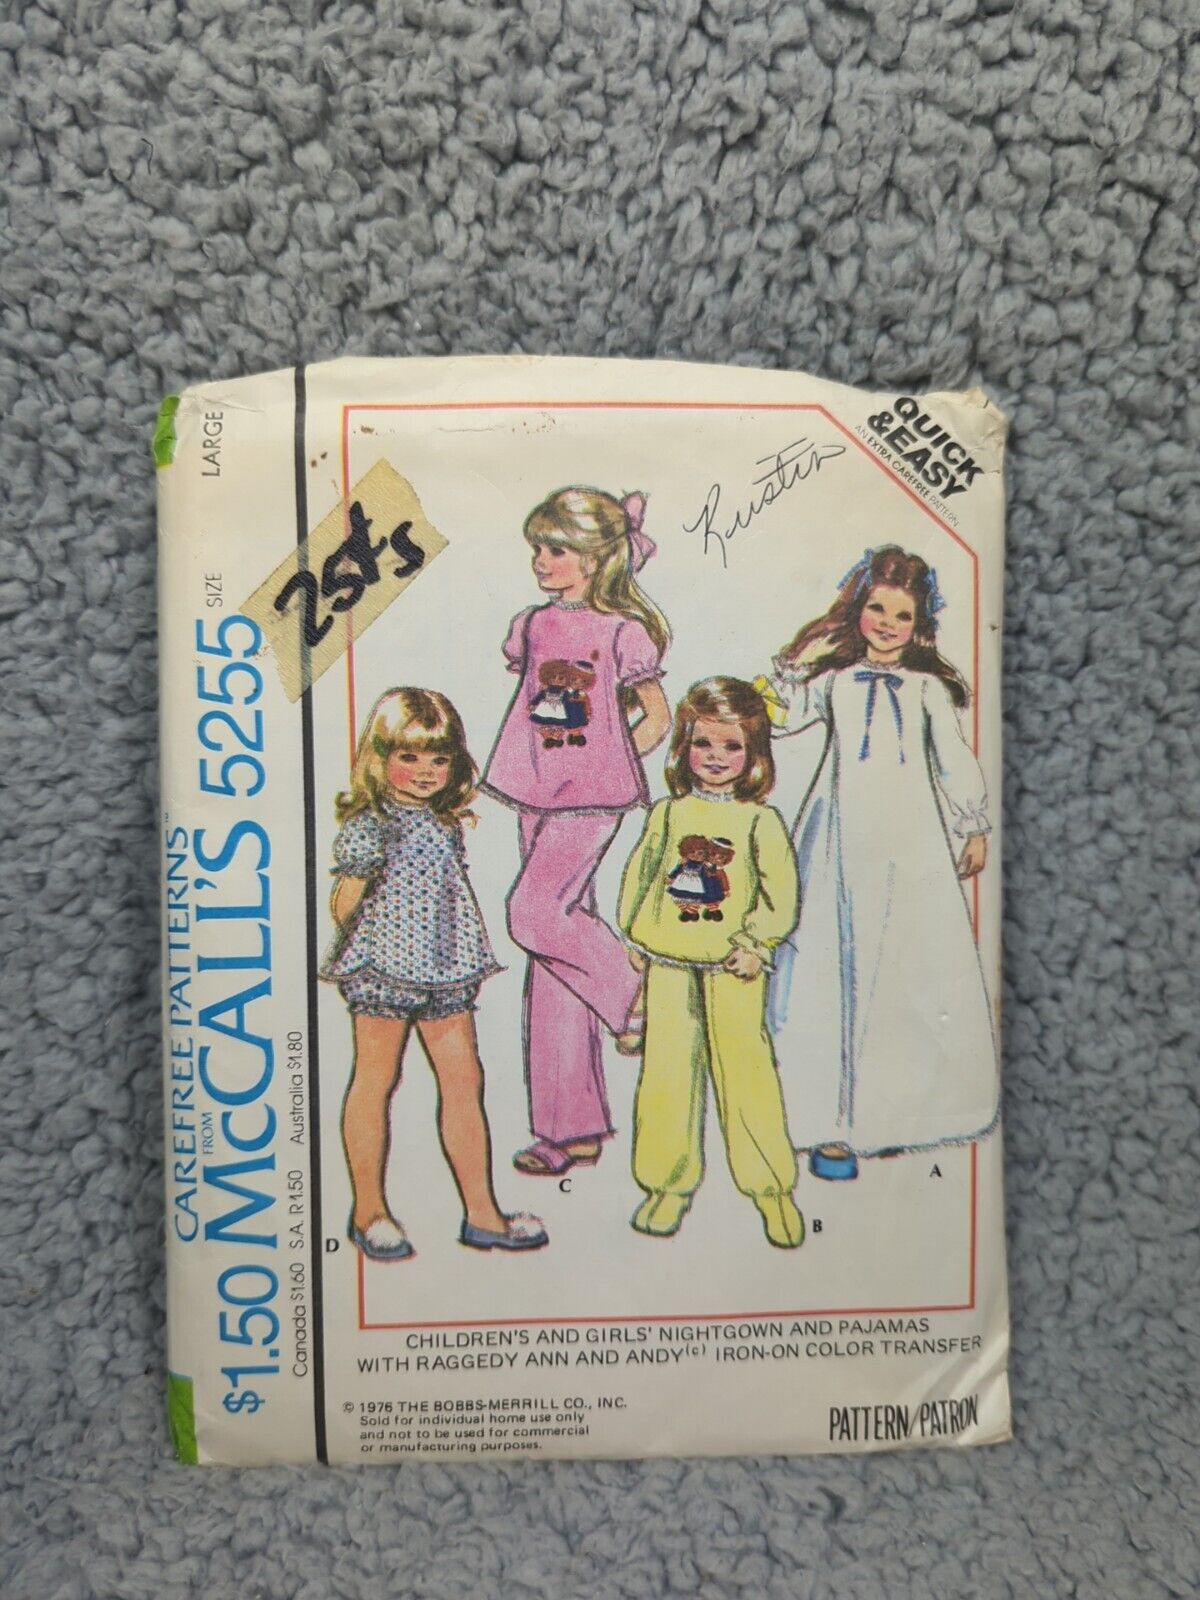 Vintage 1970s McCall\'s Sewing Pattern Transfer Girl\'s NIGHTGOWN PJs 5255 MED UC